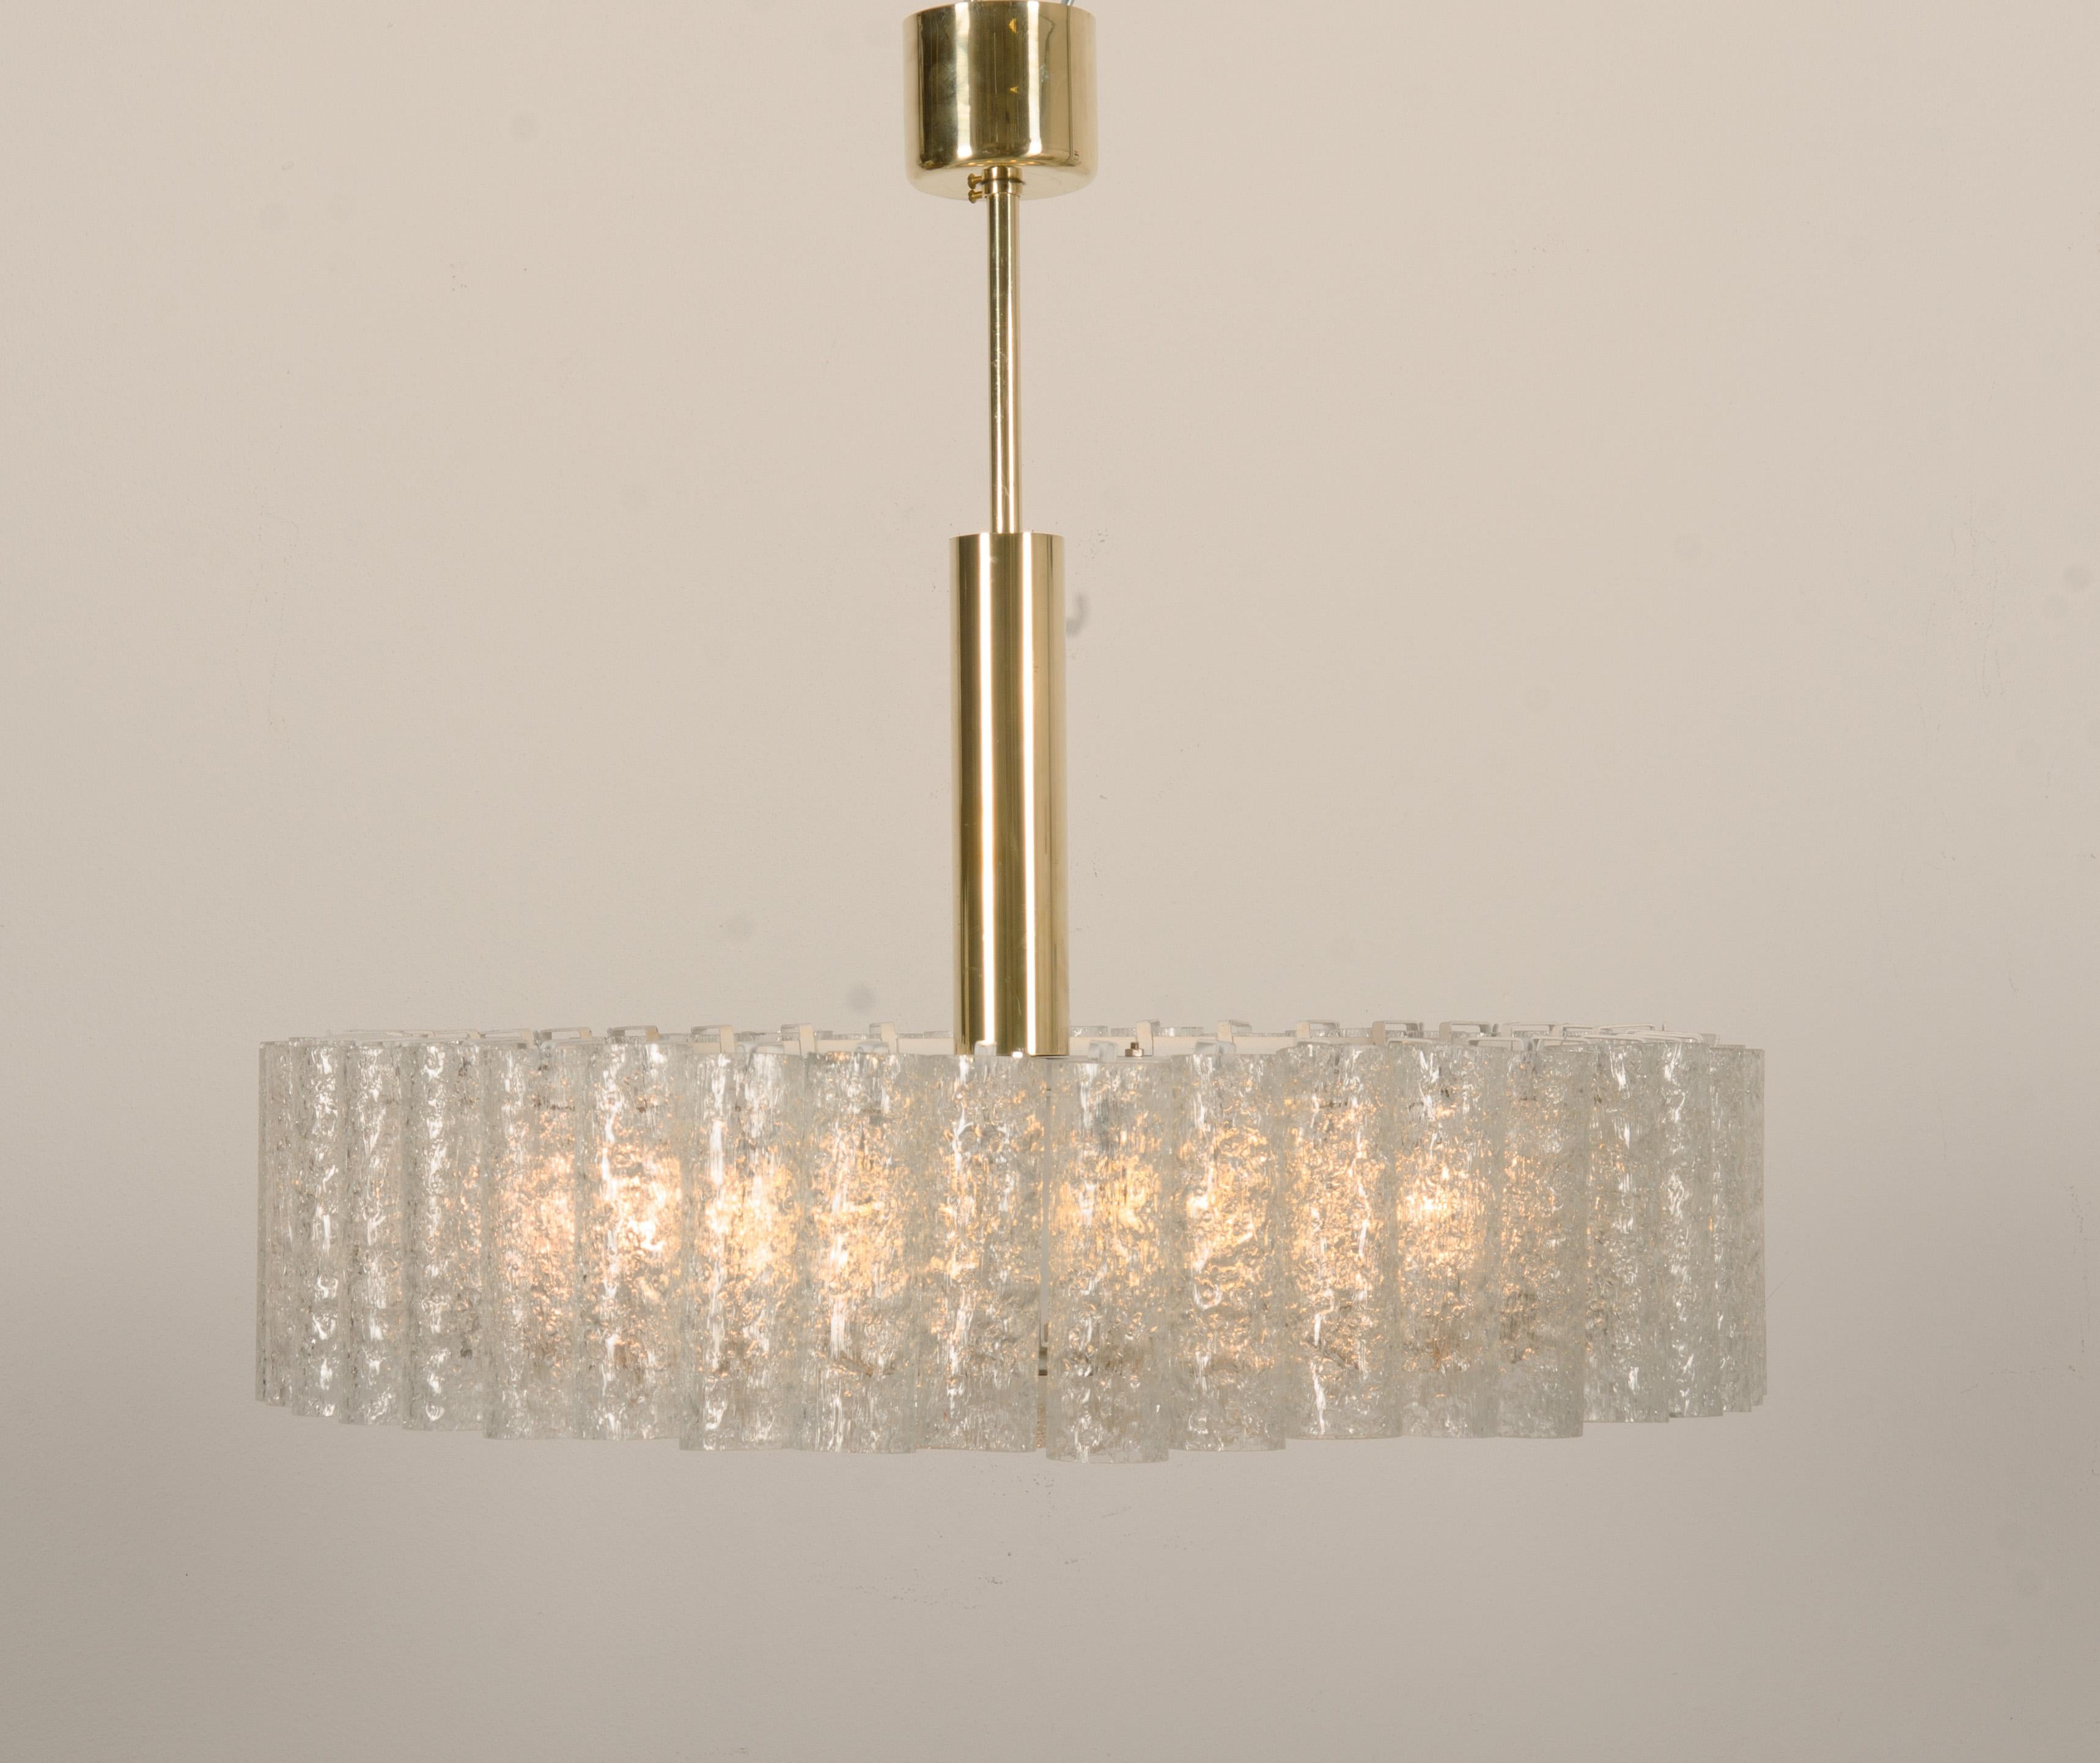 Exquisite chandelier with glass pirouettes encircling a brass plate with crackled glass diffuser.
Fitted with six E-27 bulbs. Designed by Doria in Germany in the 1960s.
2 pieces available, price per chandelier.